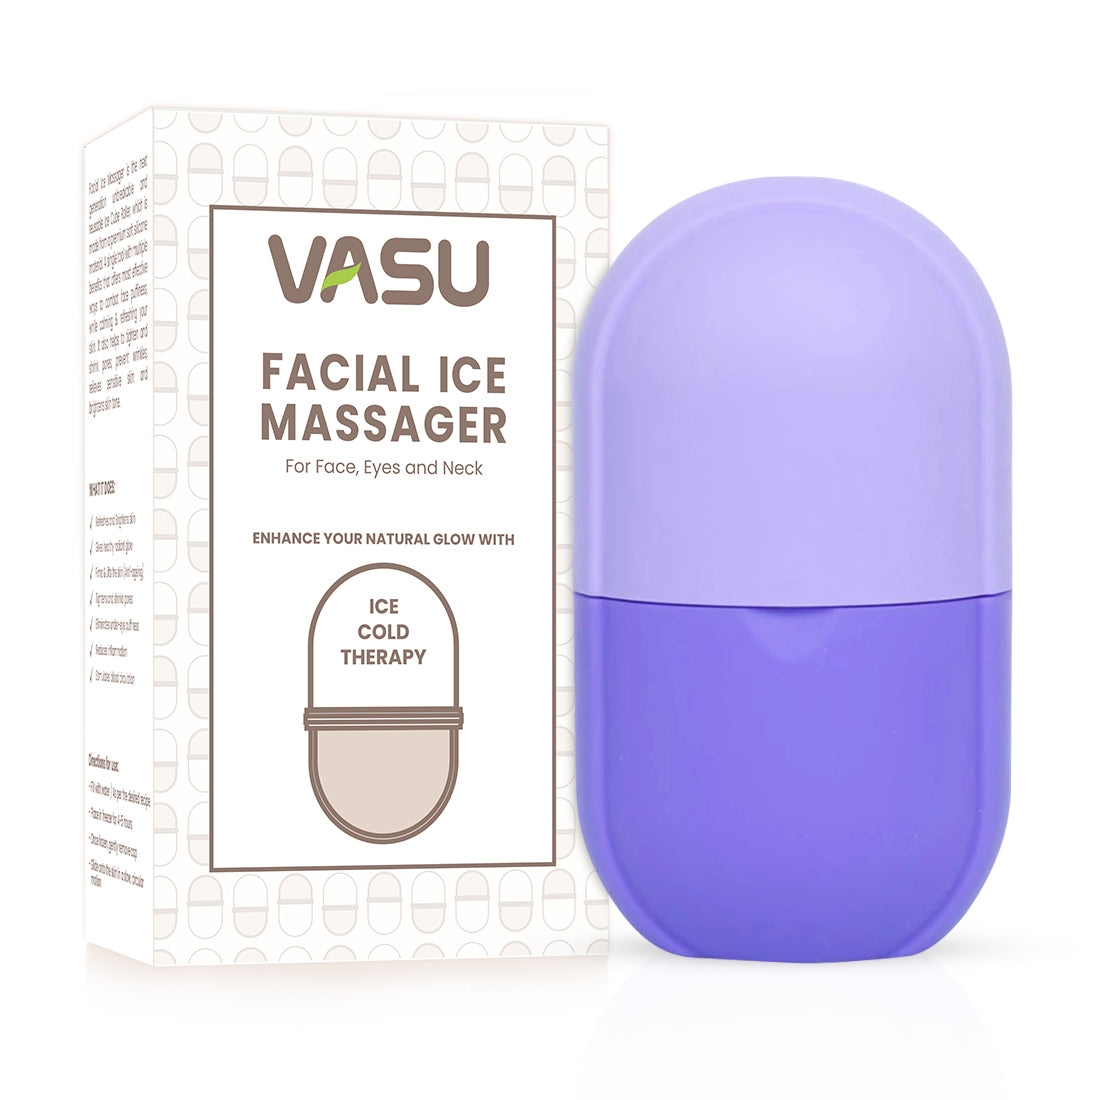 Facial Ice Massager for Face, Eyes & Neck (Purple) - Ice Cube Roller - One Tool with Multiple Benefits - Helps to Combat Face Puffiness, Calm & Refresh Your Skin - VasuStore